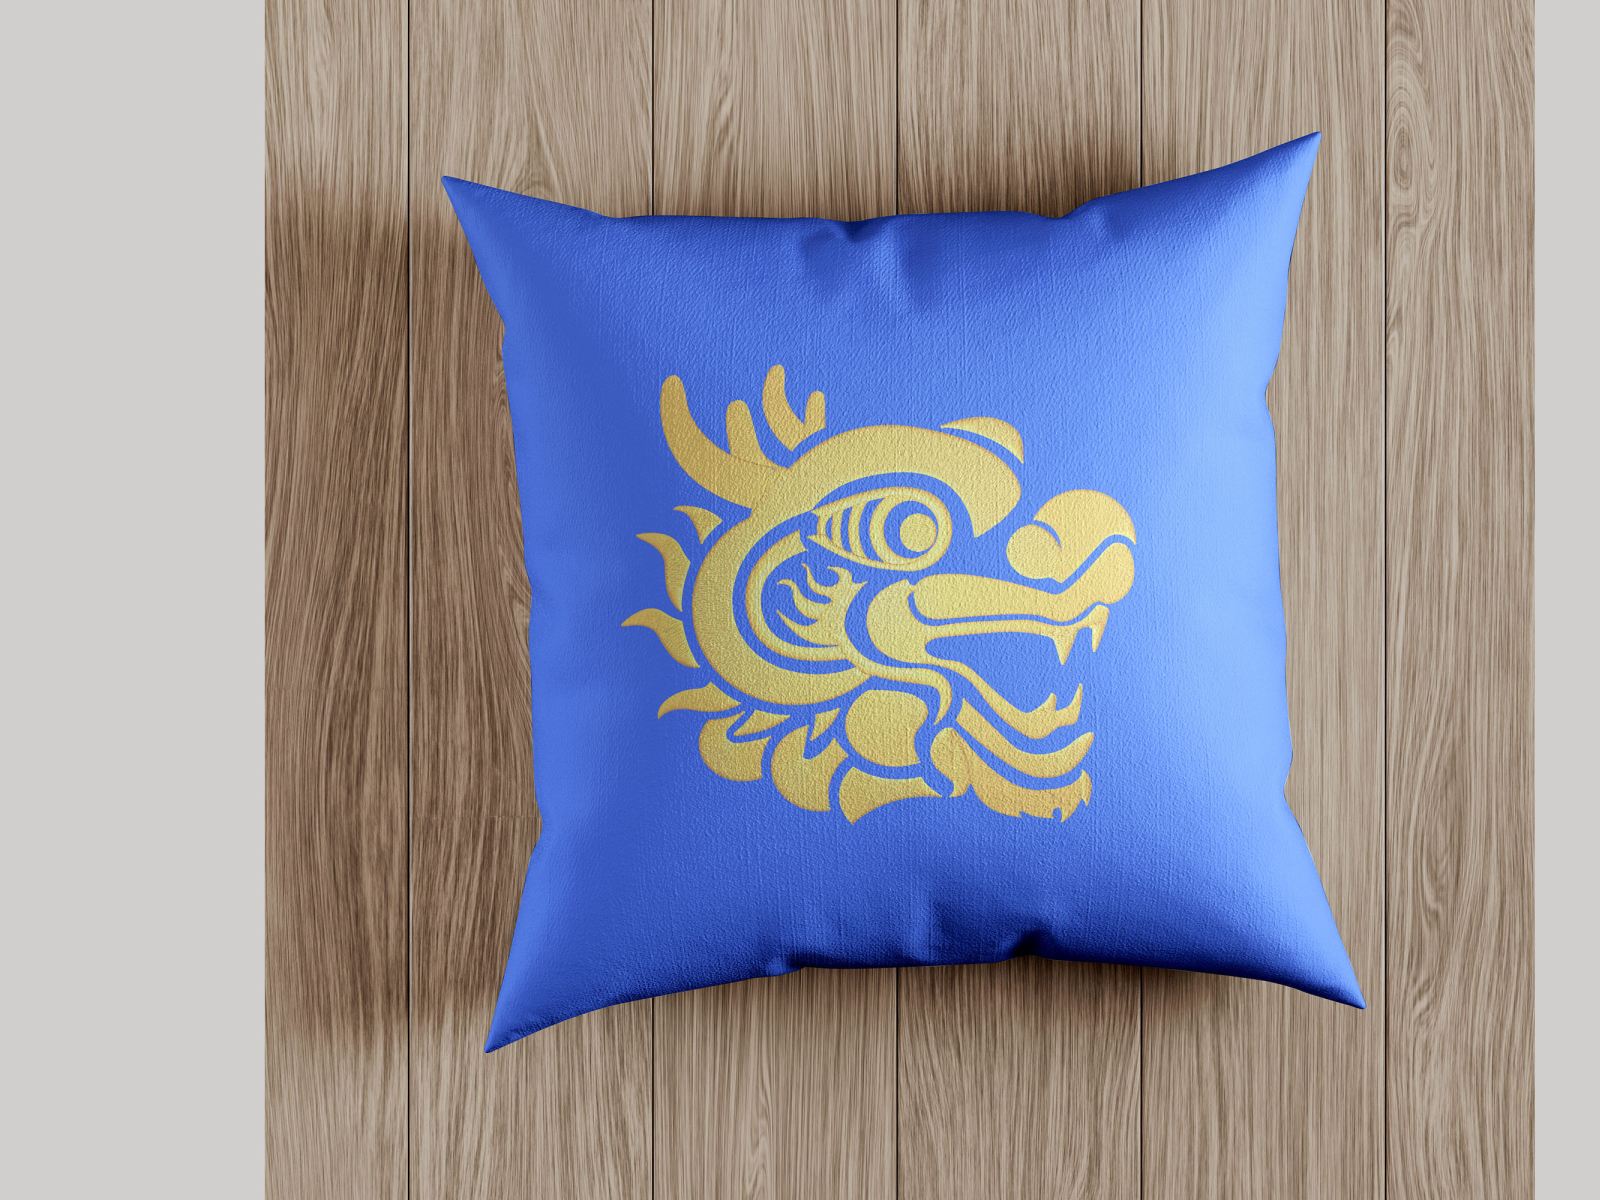 Chinese Dragon-embroidery by Dimitris Politis on Dribbble